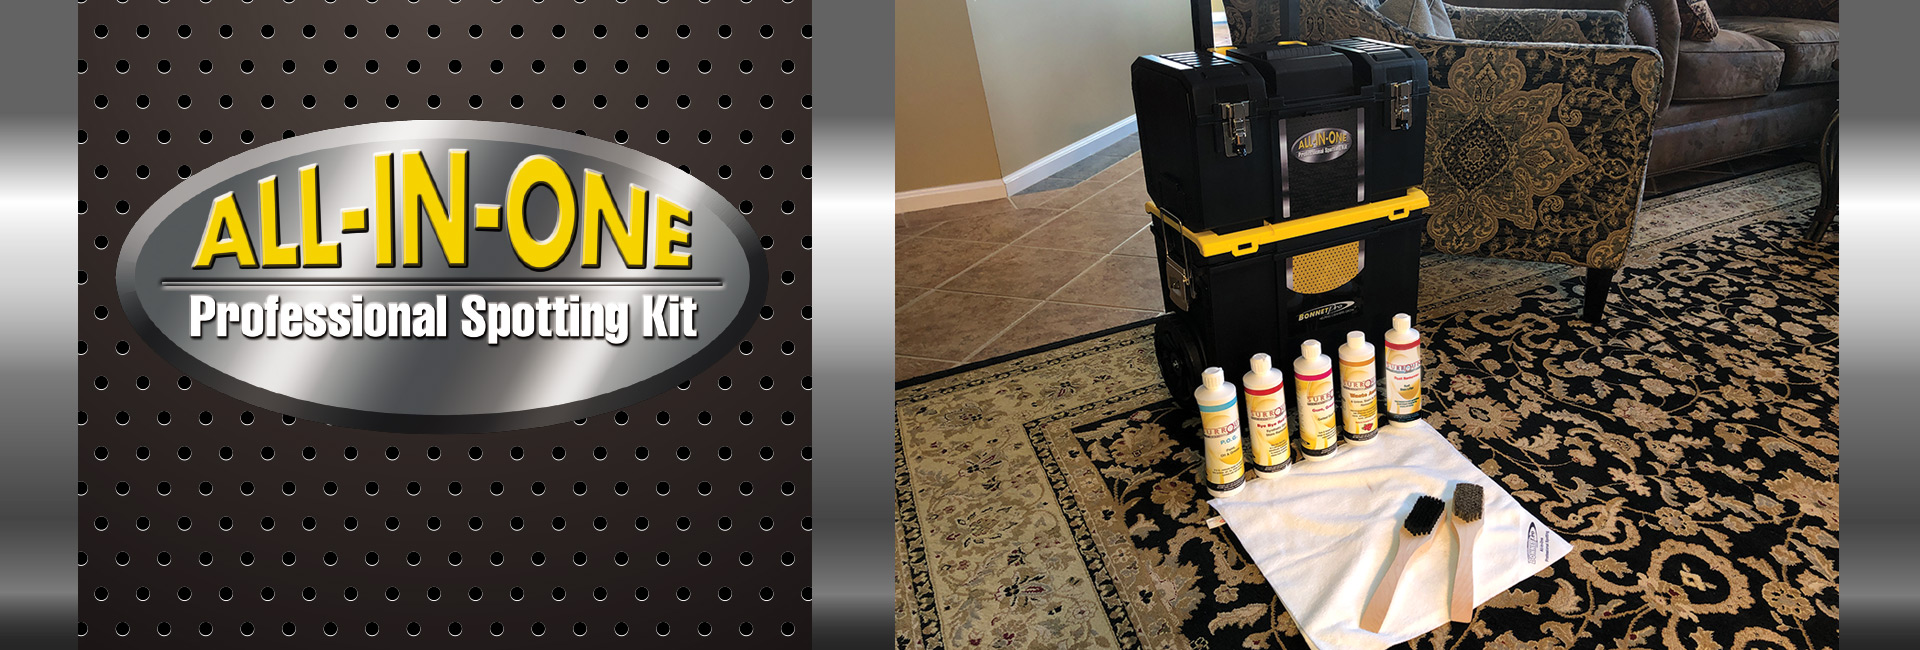 All in One rolling organizer for carpet cleaning products